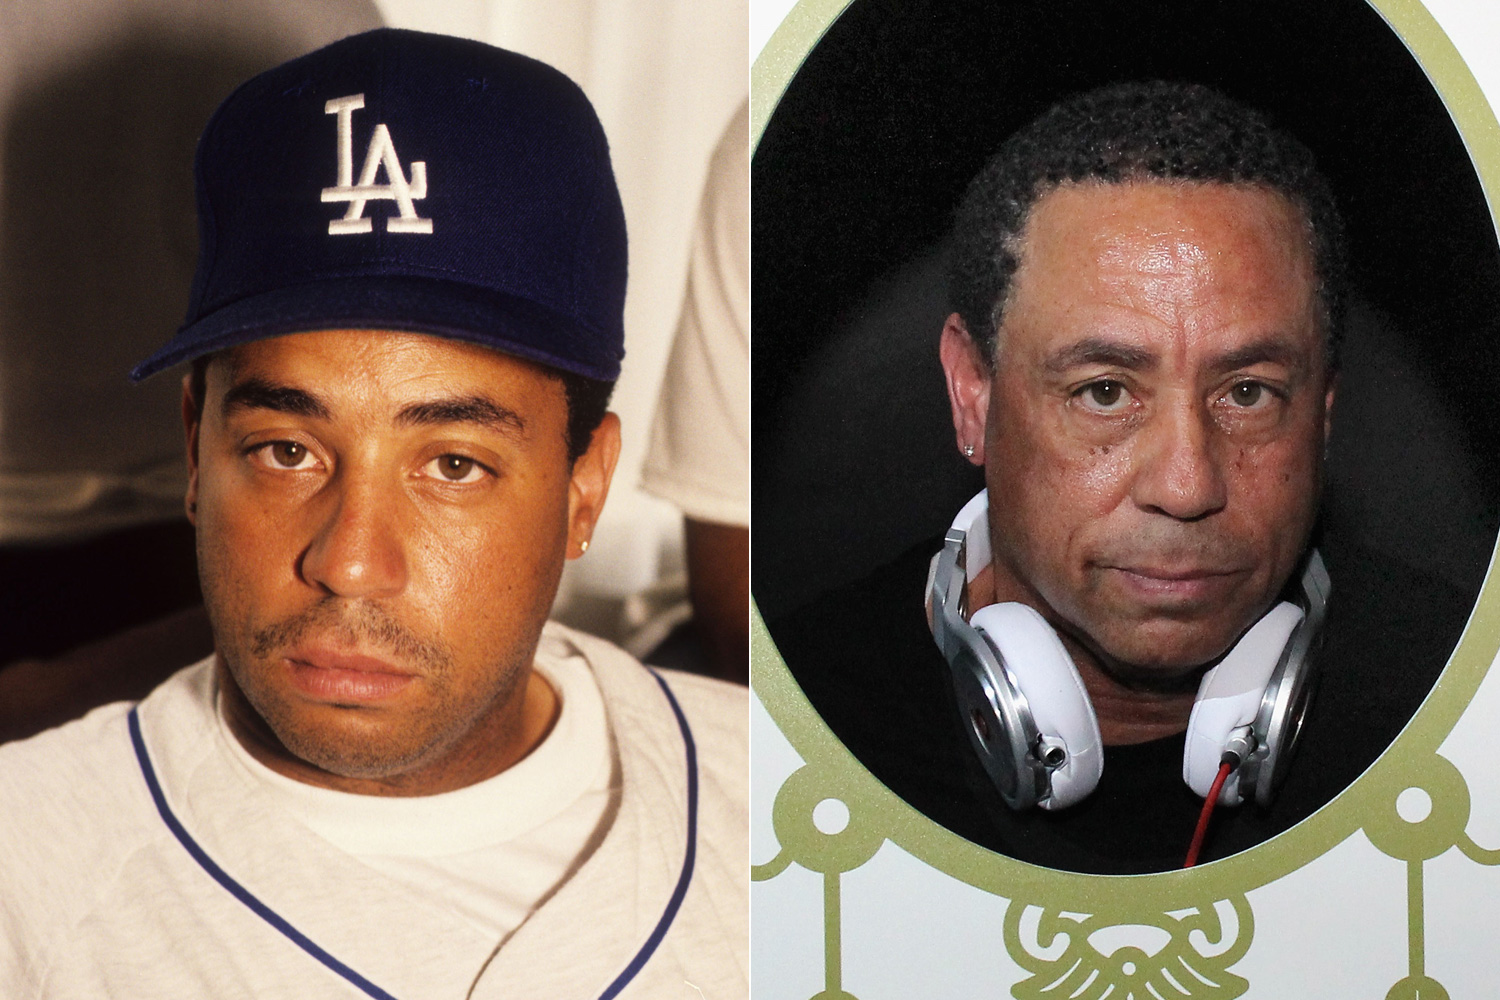 DJ Yella (Antoine Carraby) dropped his own solo album in 1996, five years after the group split. Shortly thereafter, he retired from music to focus on a career directing adult films. He has reportedly unretired from music and is said to be working on an album called 'West Coastin.'